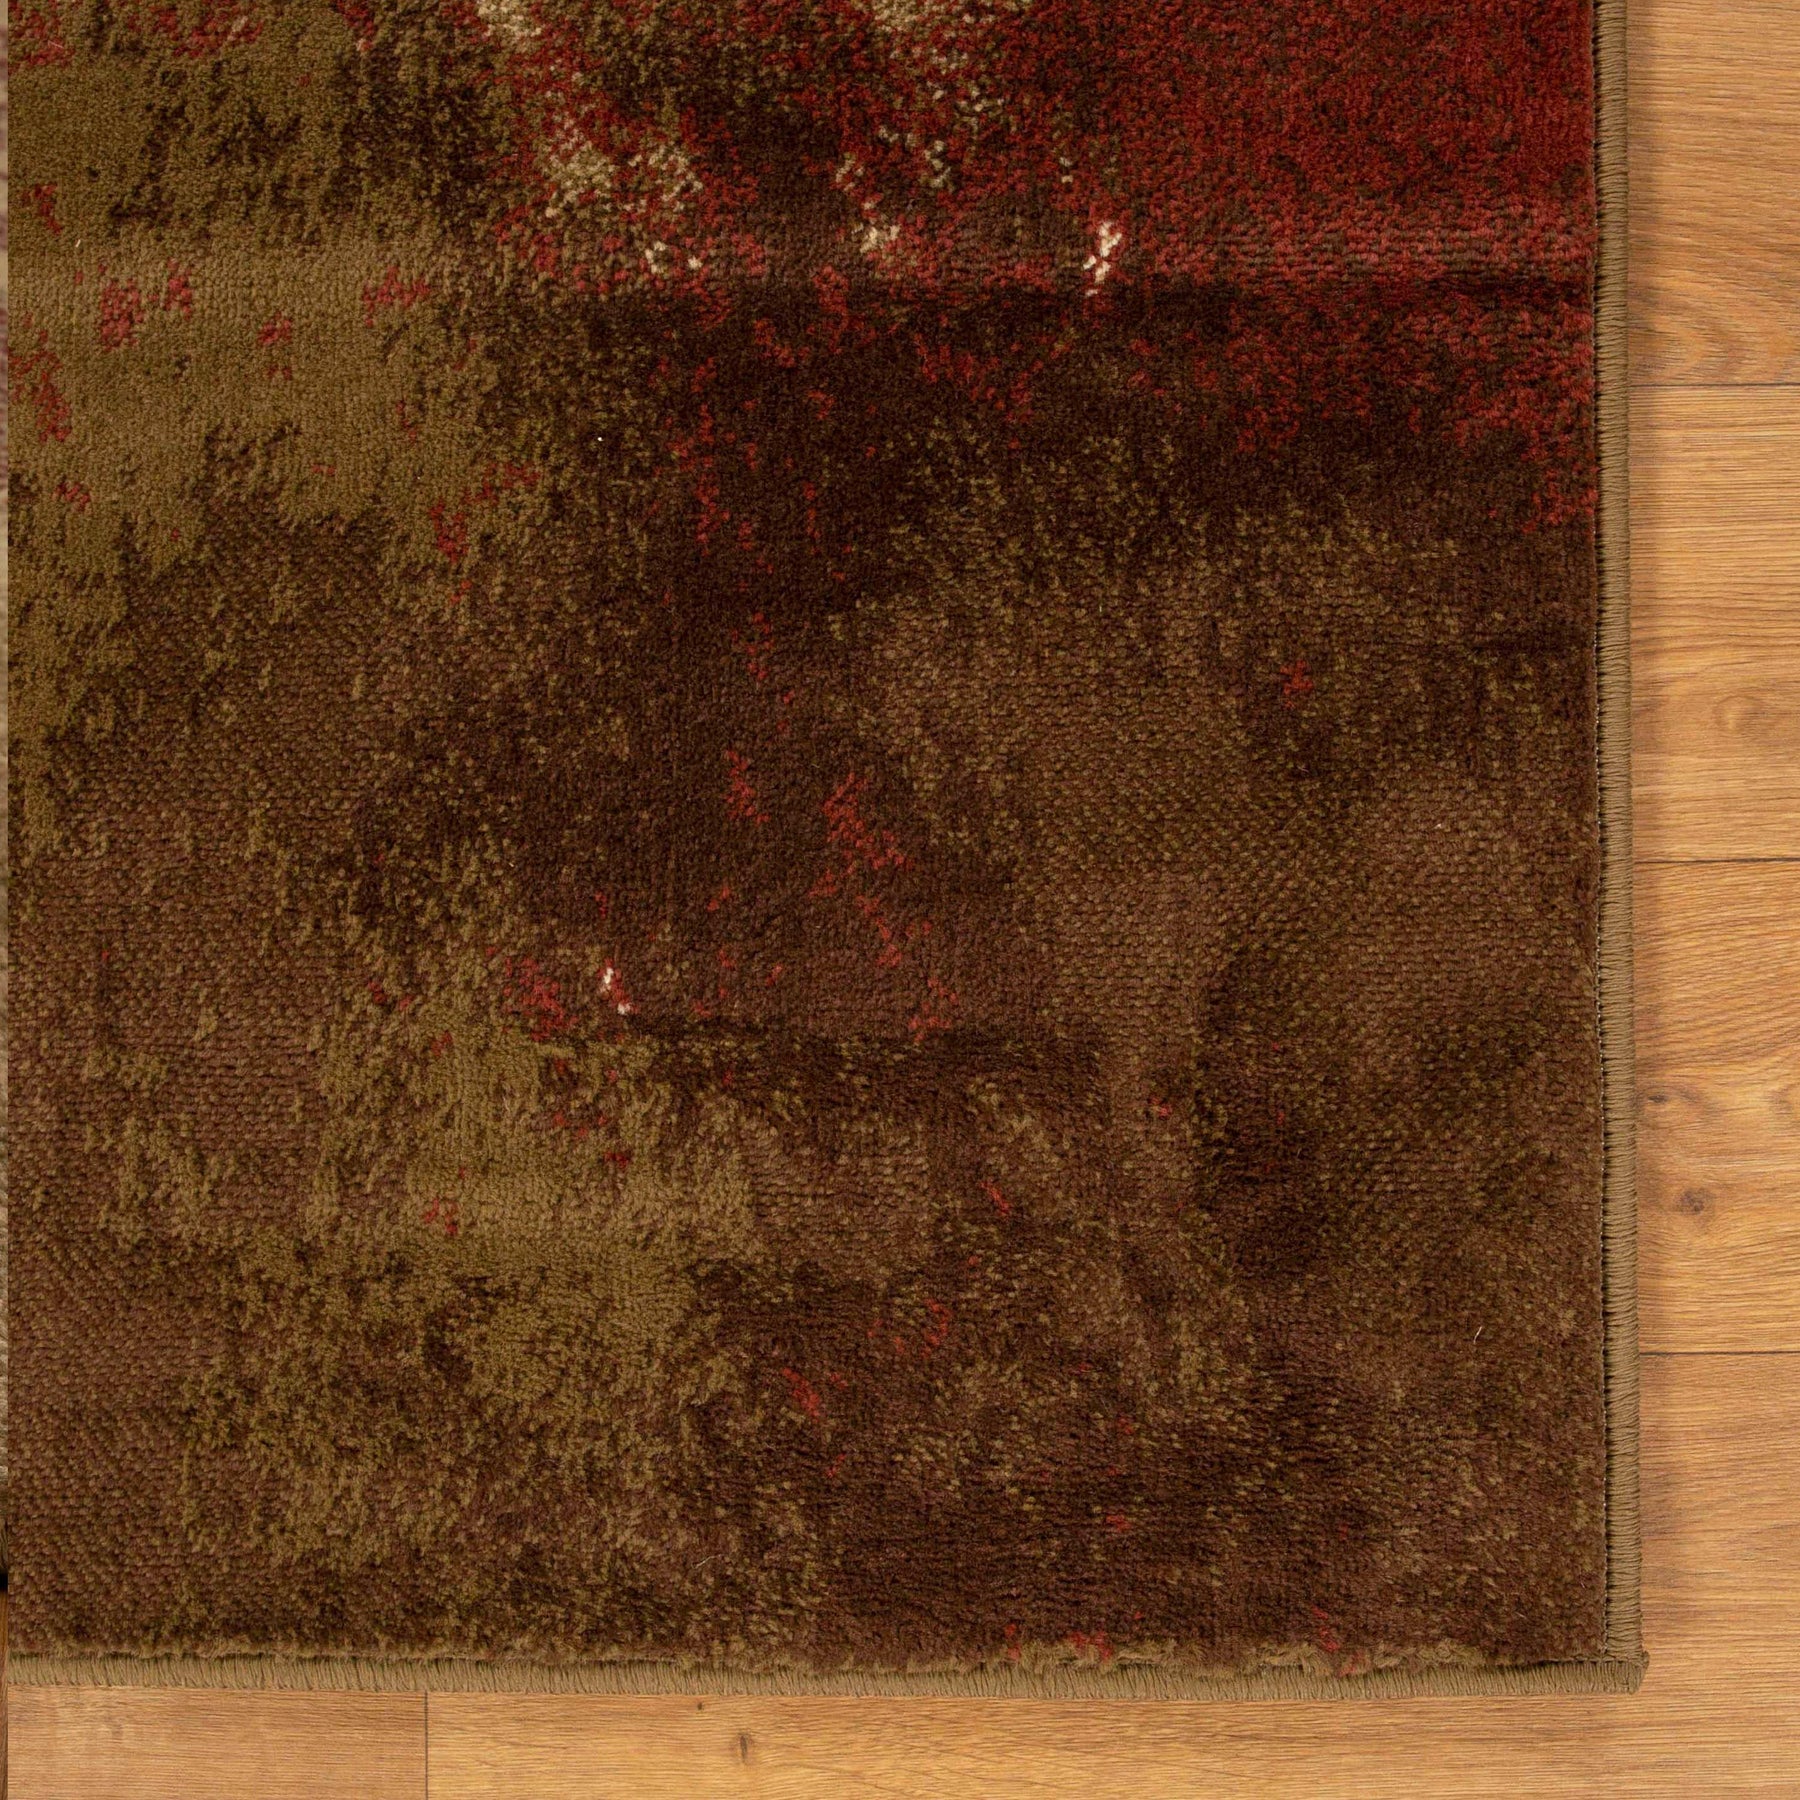 Eclectic Multi-Tone Abstract Rug or Runner - Maroon